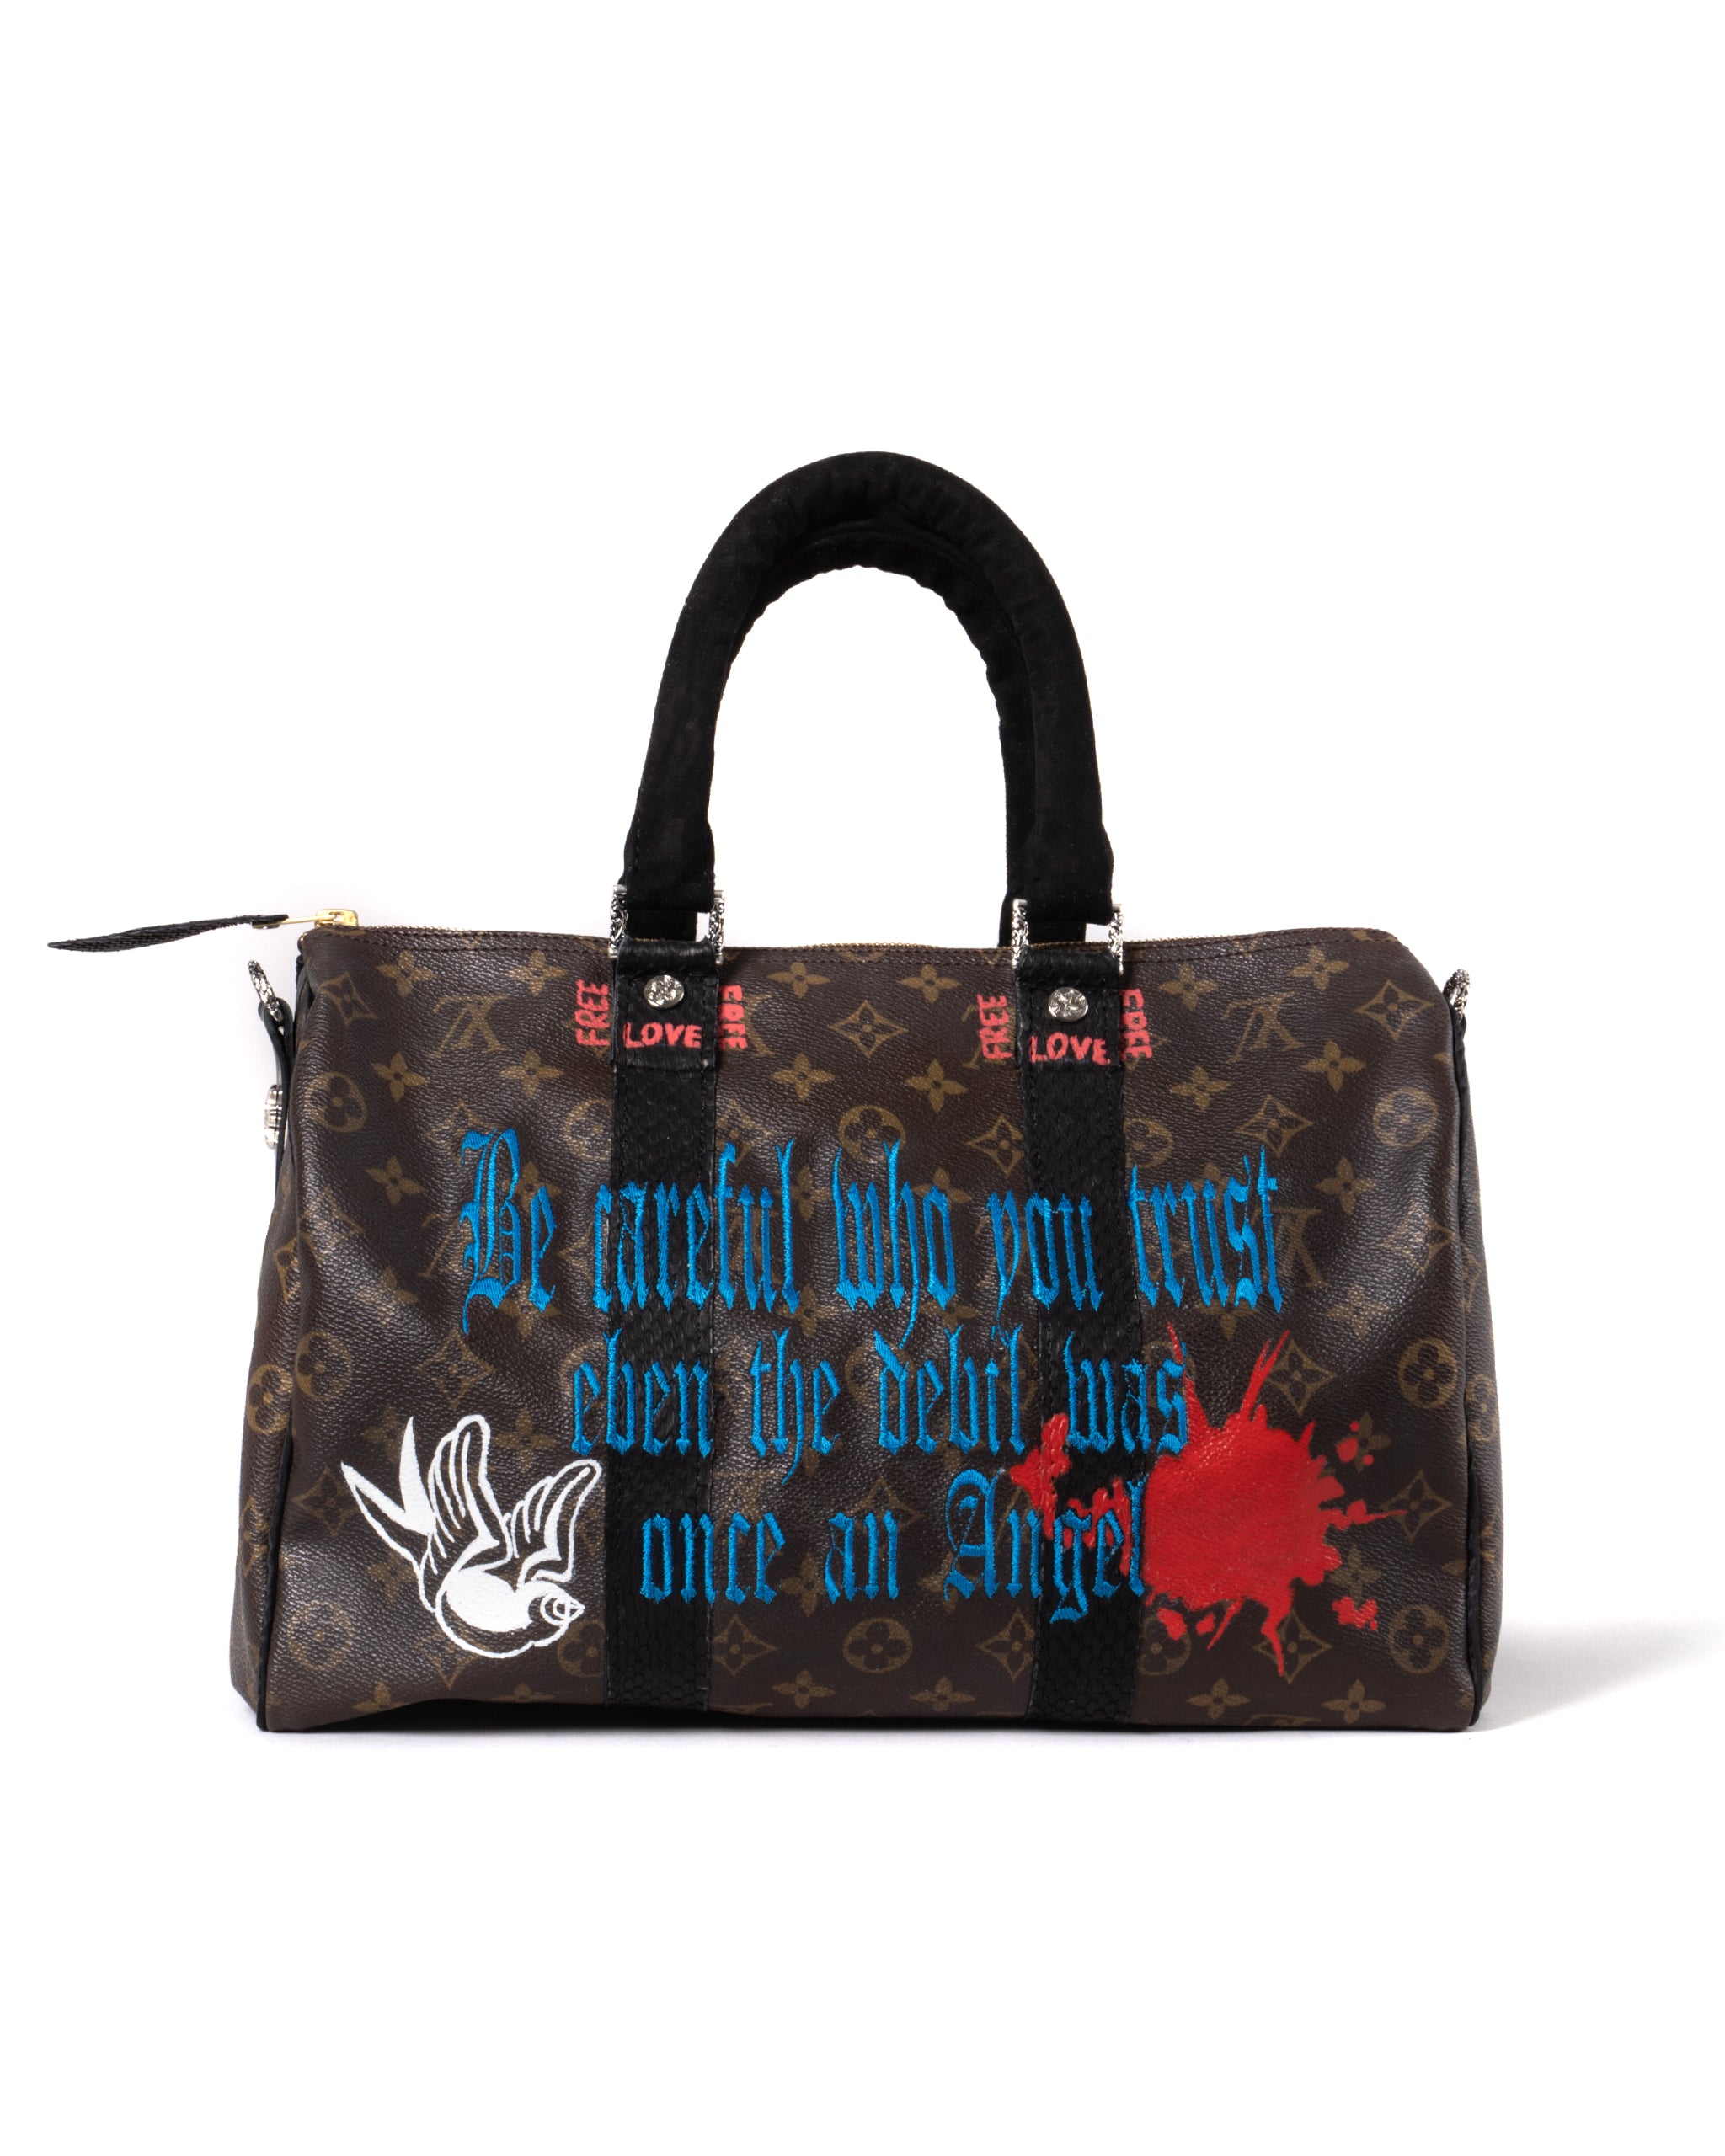 BE CARE FULL WHO YOU TRUST VINTAGE LOUIS VUITTON BAG